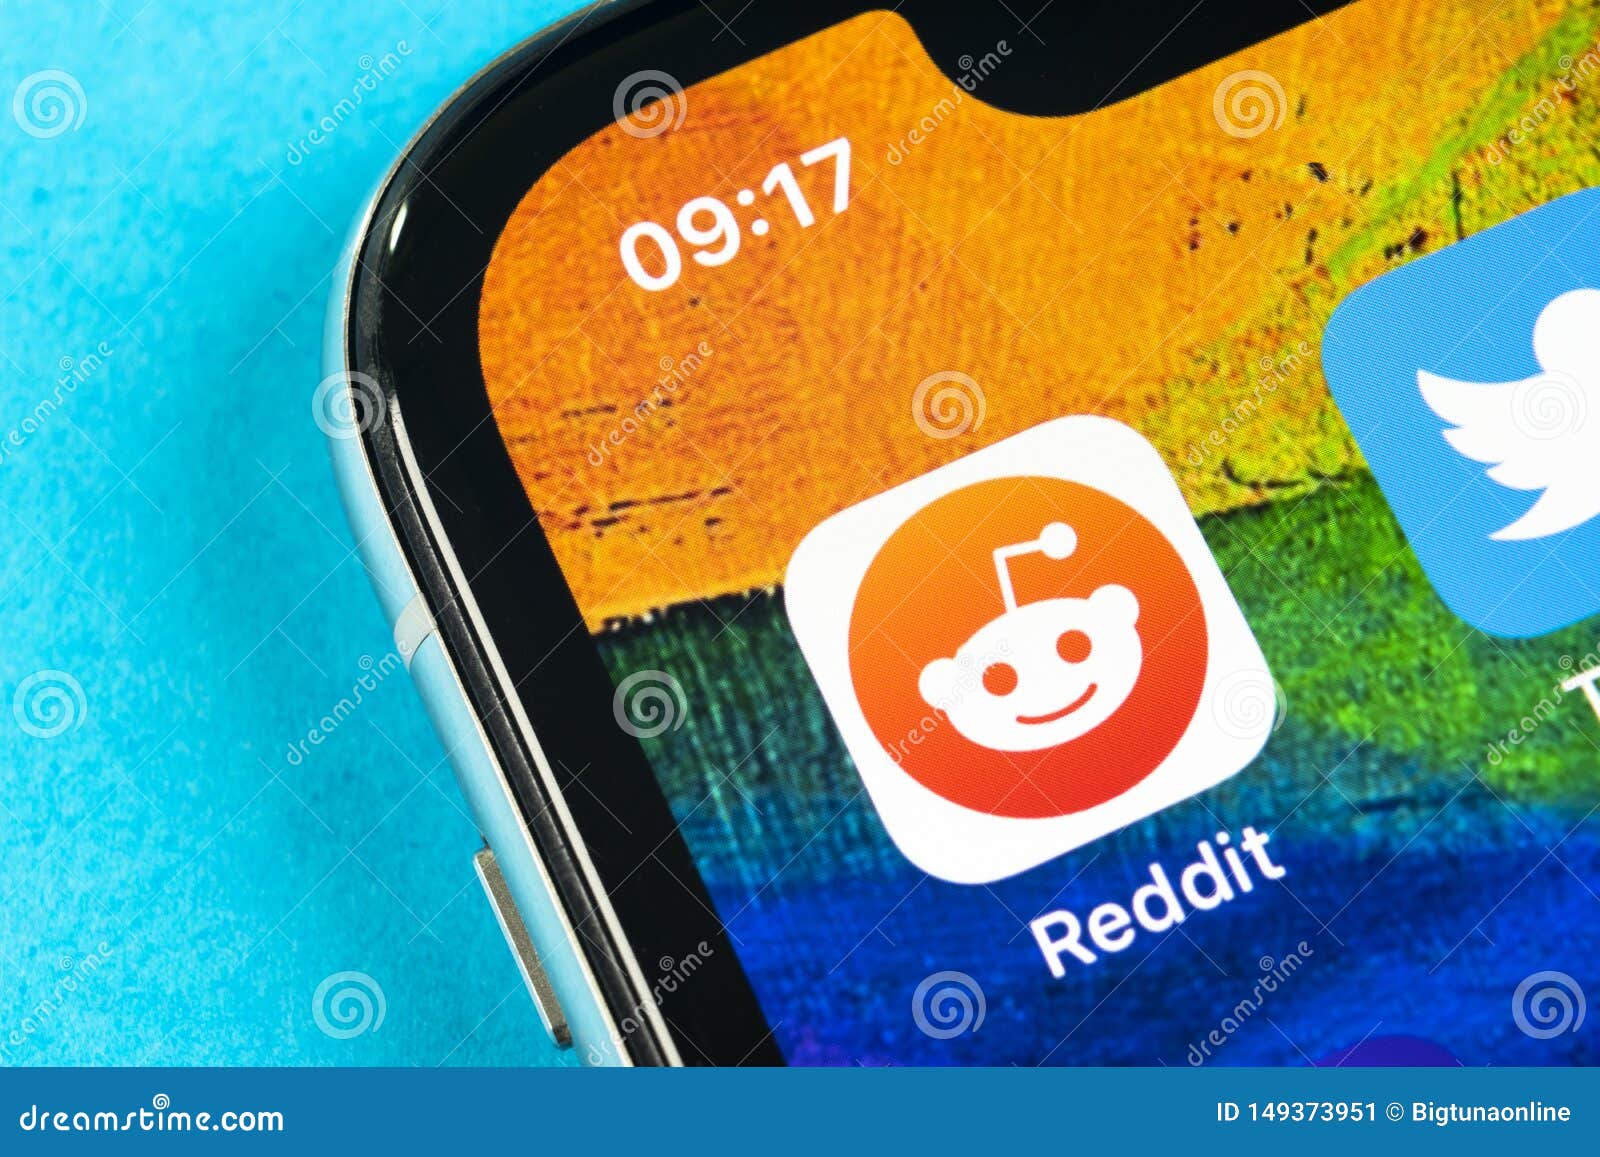 Reddit Application Icon on Apple IPhone X Smartphone Screen Close-up. Reddit  App Icon Editorial Photo - Image of connection, finland: 149373951